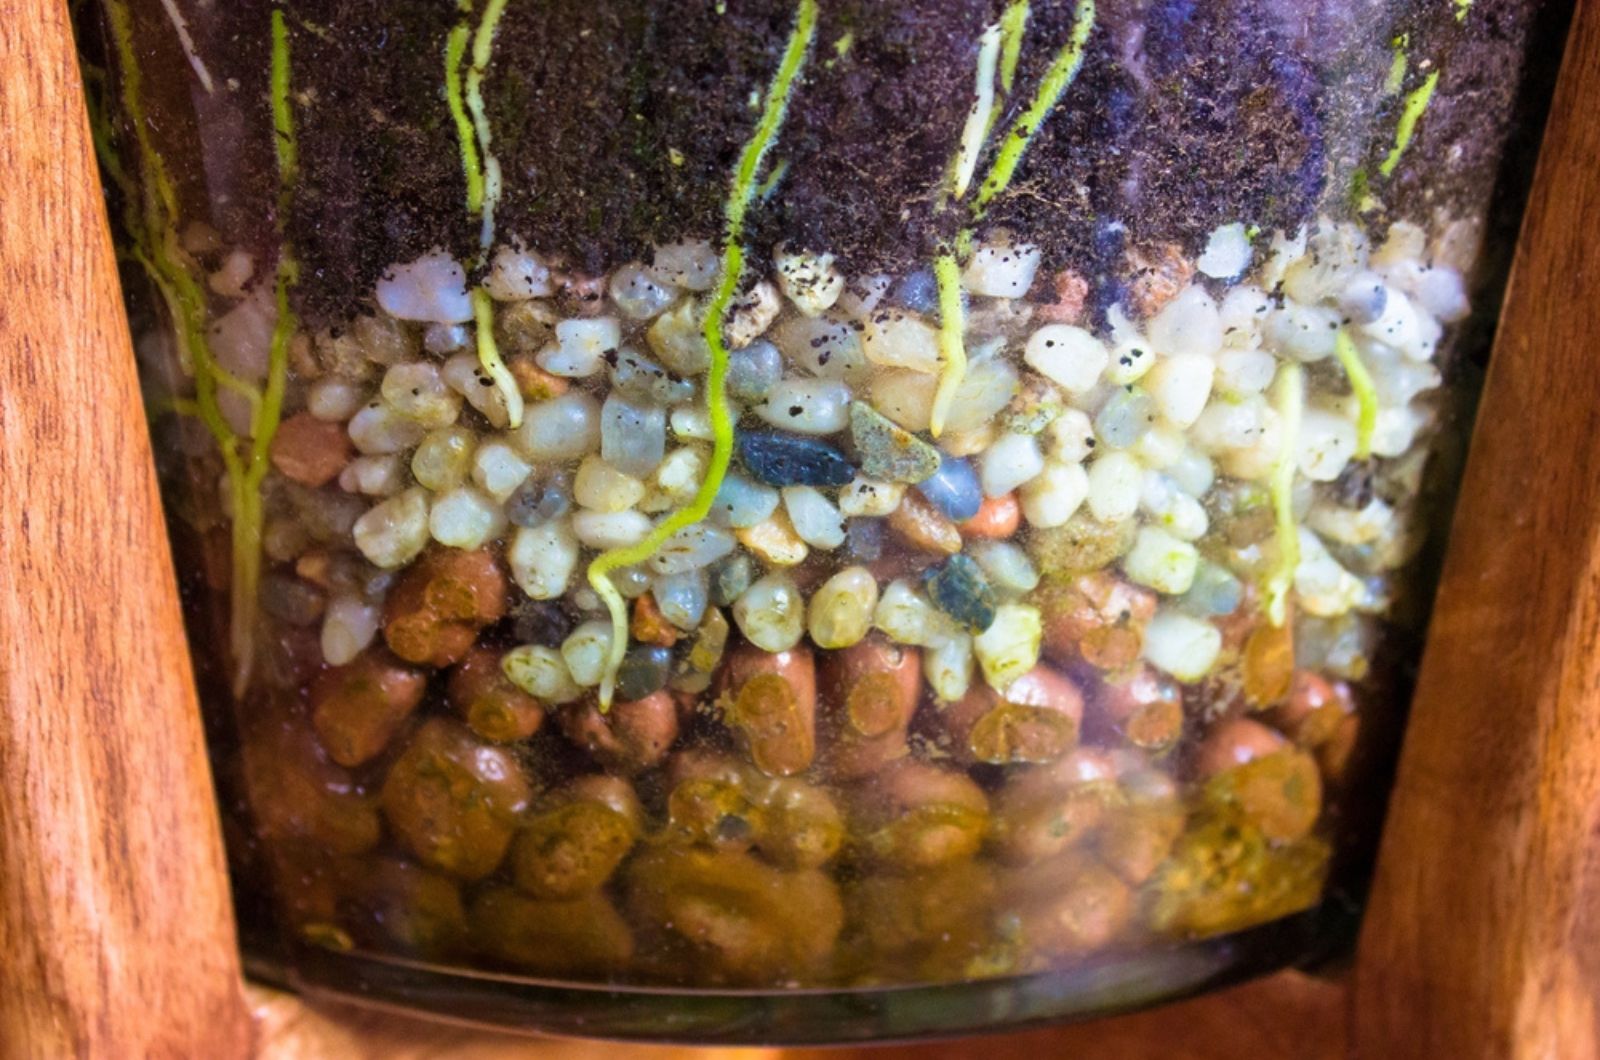 Fertile soil with small stones in a transparent vase